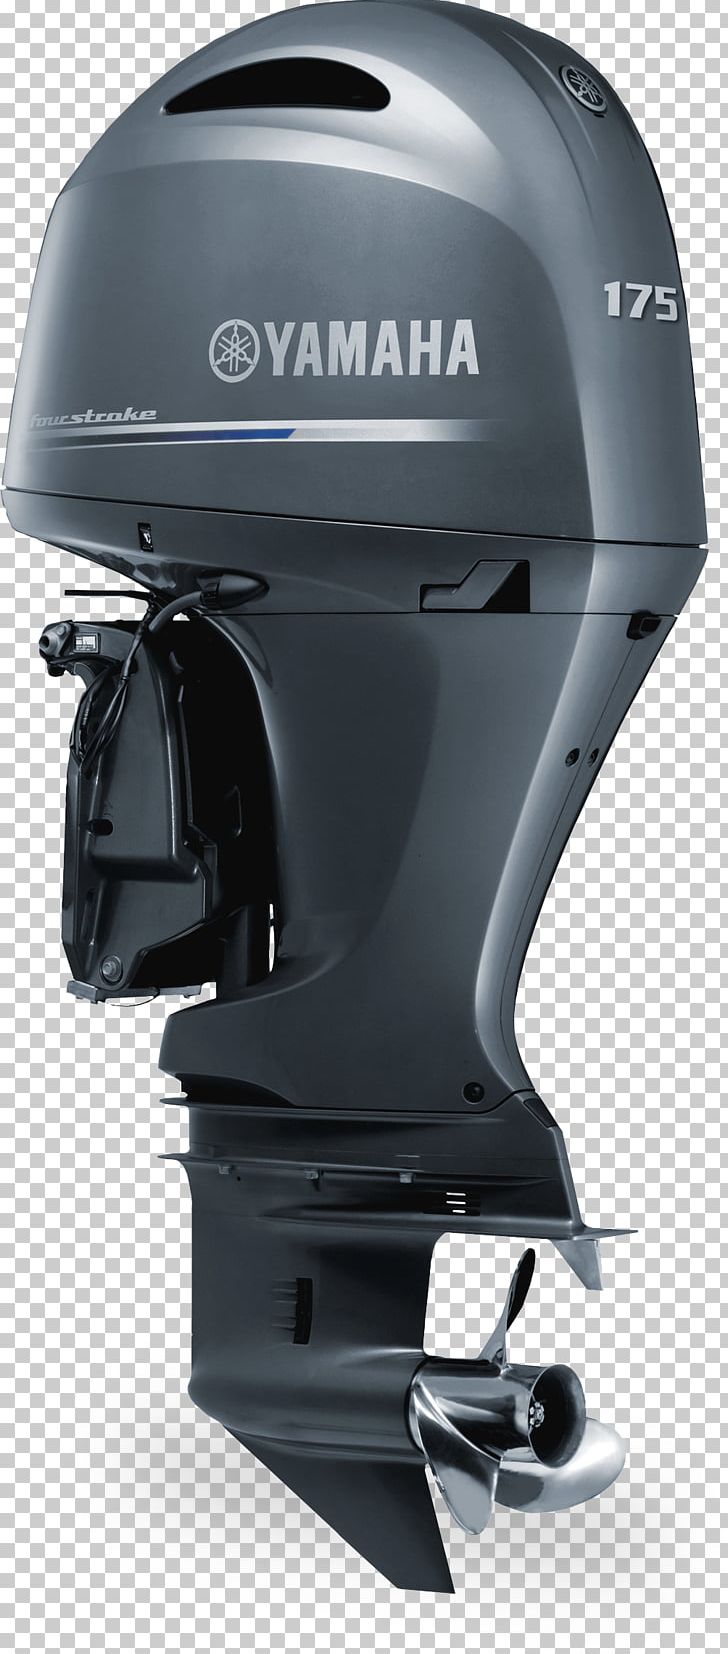 Yamaha Motor Company Outboard Motor Four-stroke Engine Boat PNG, Clipart, Bicycle Helmet, Boat, Bootsmotor, Cylinder, Engine Free PNG Download